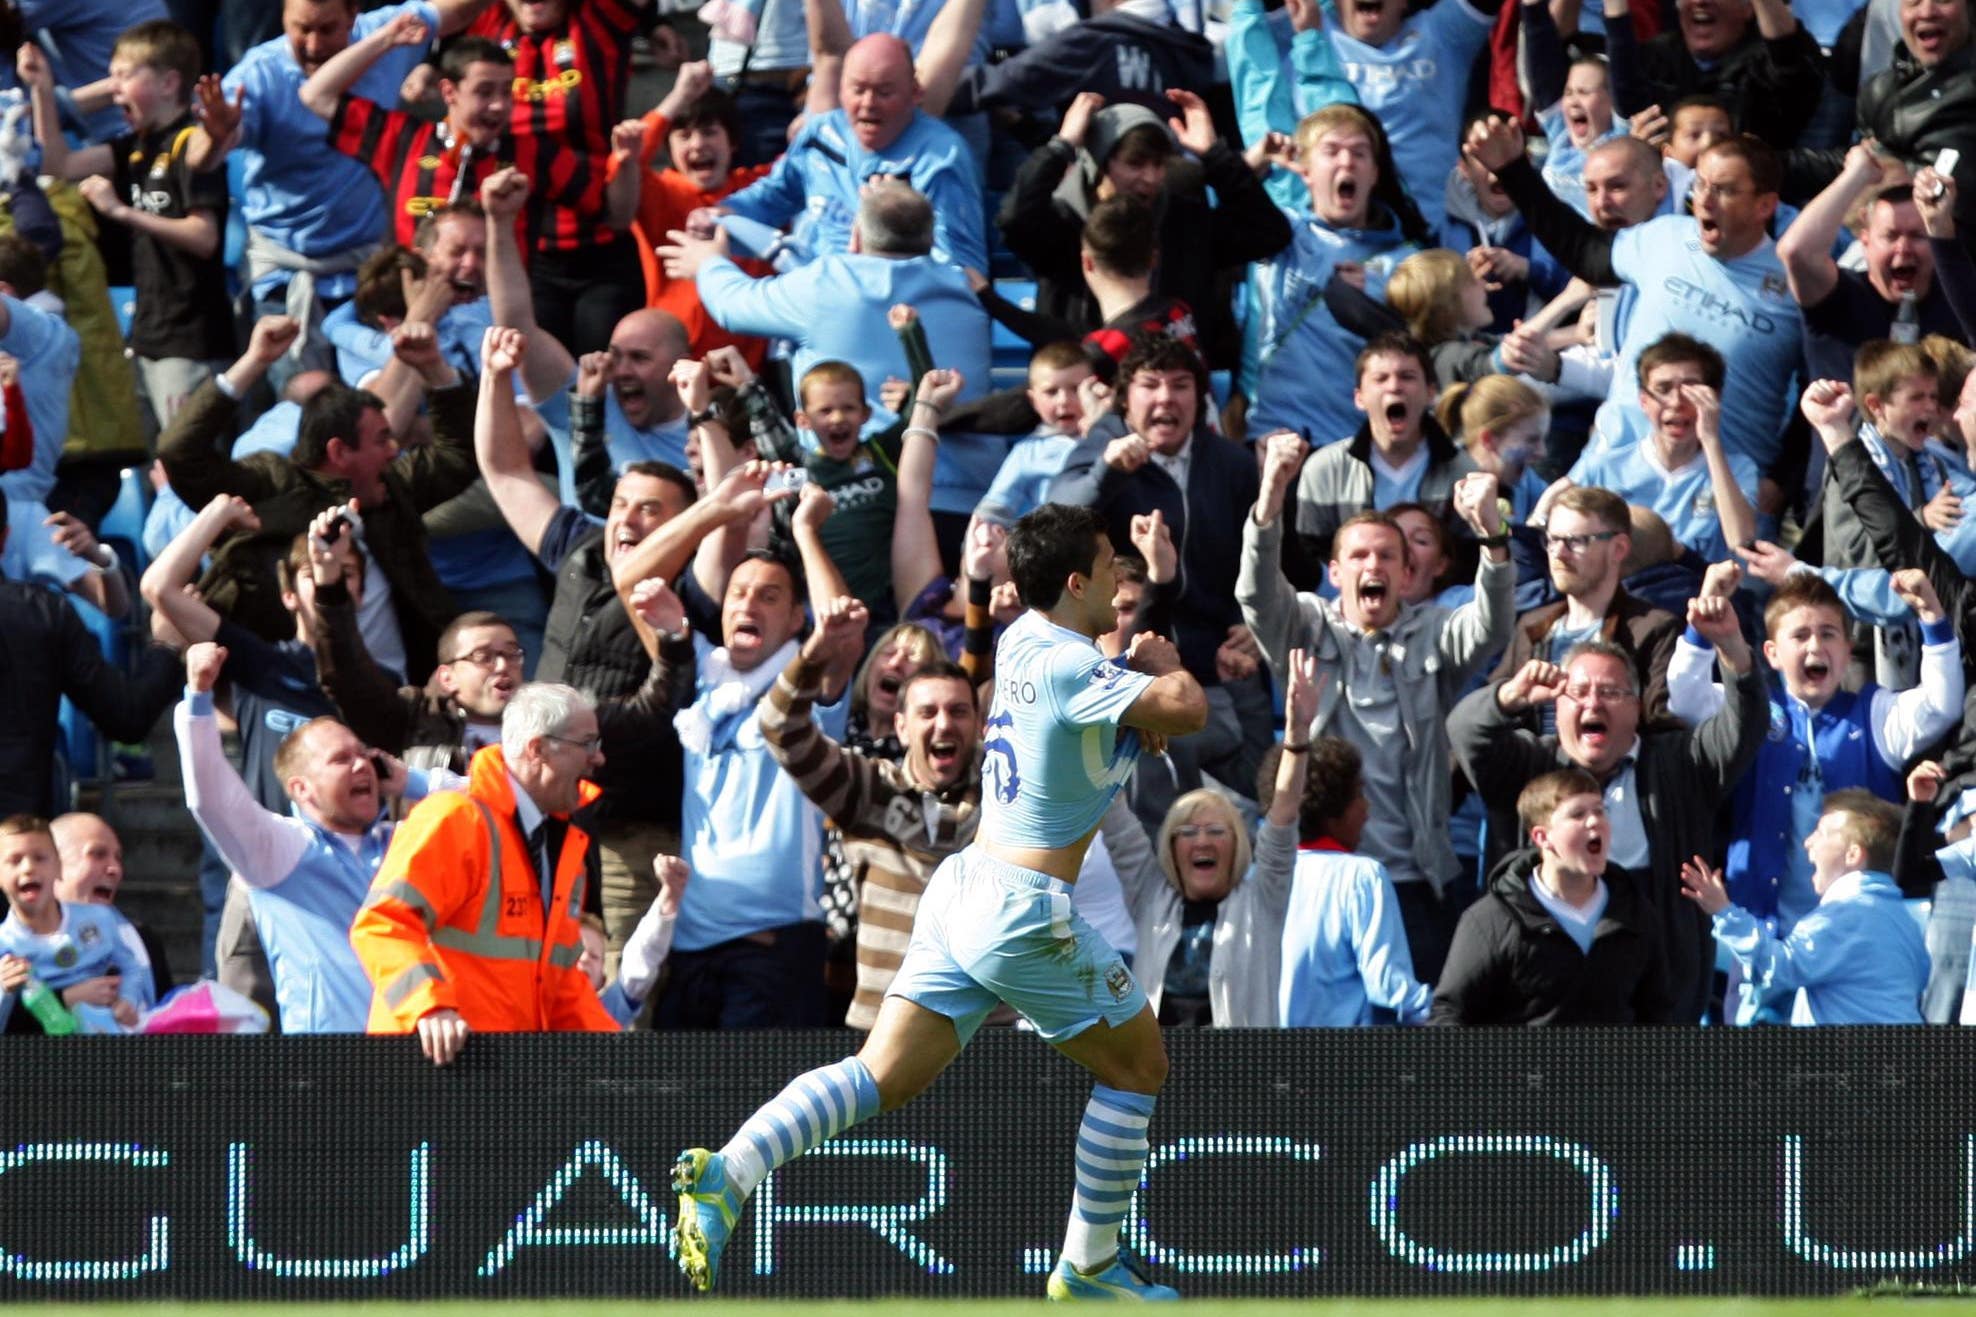 Sergio Aguero celebrates after clinching the title for Manchester City in 2012 (Dave Thompson/PA)